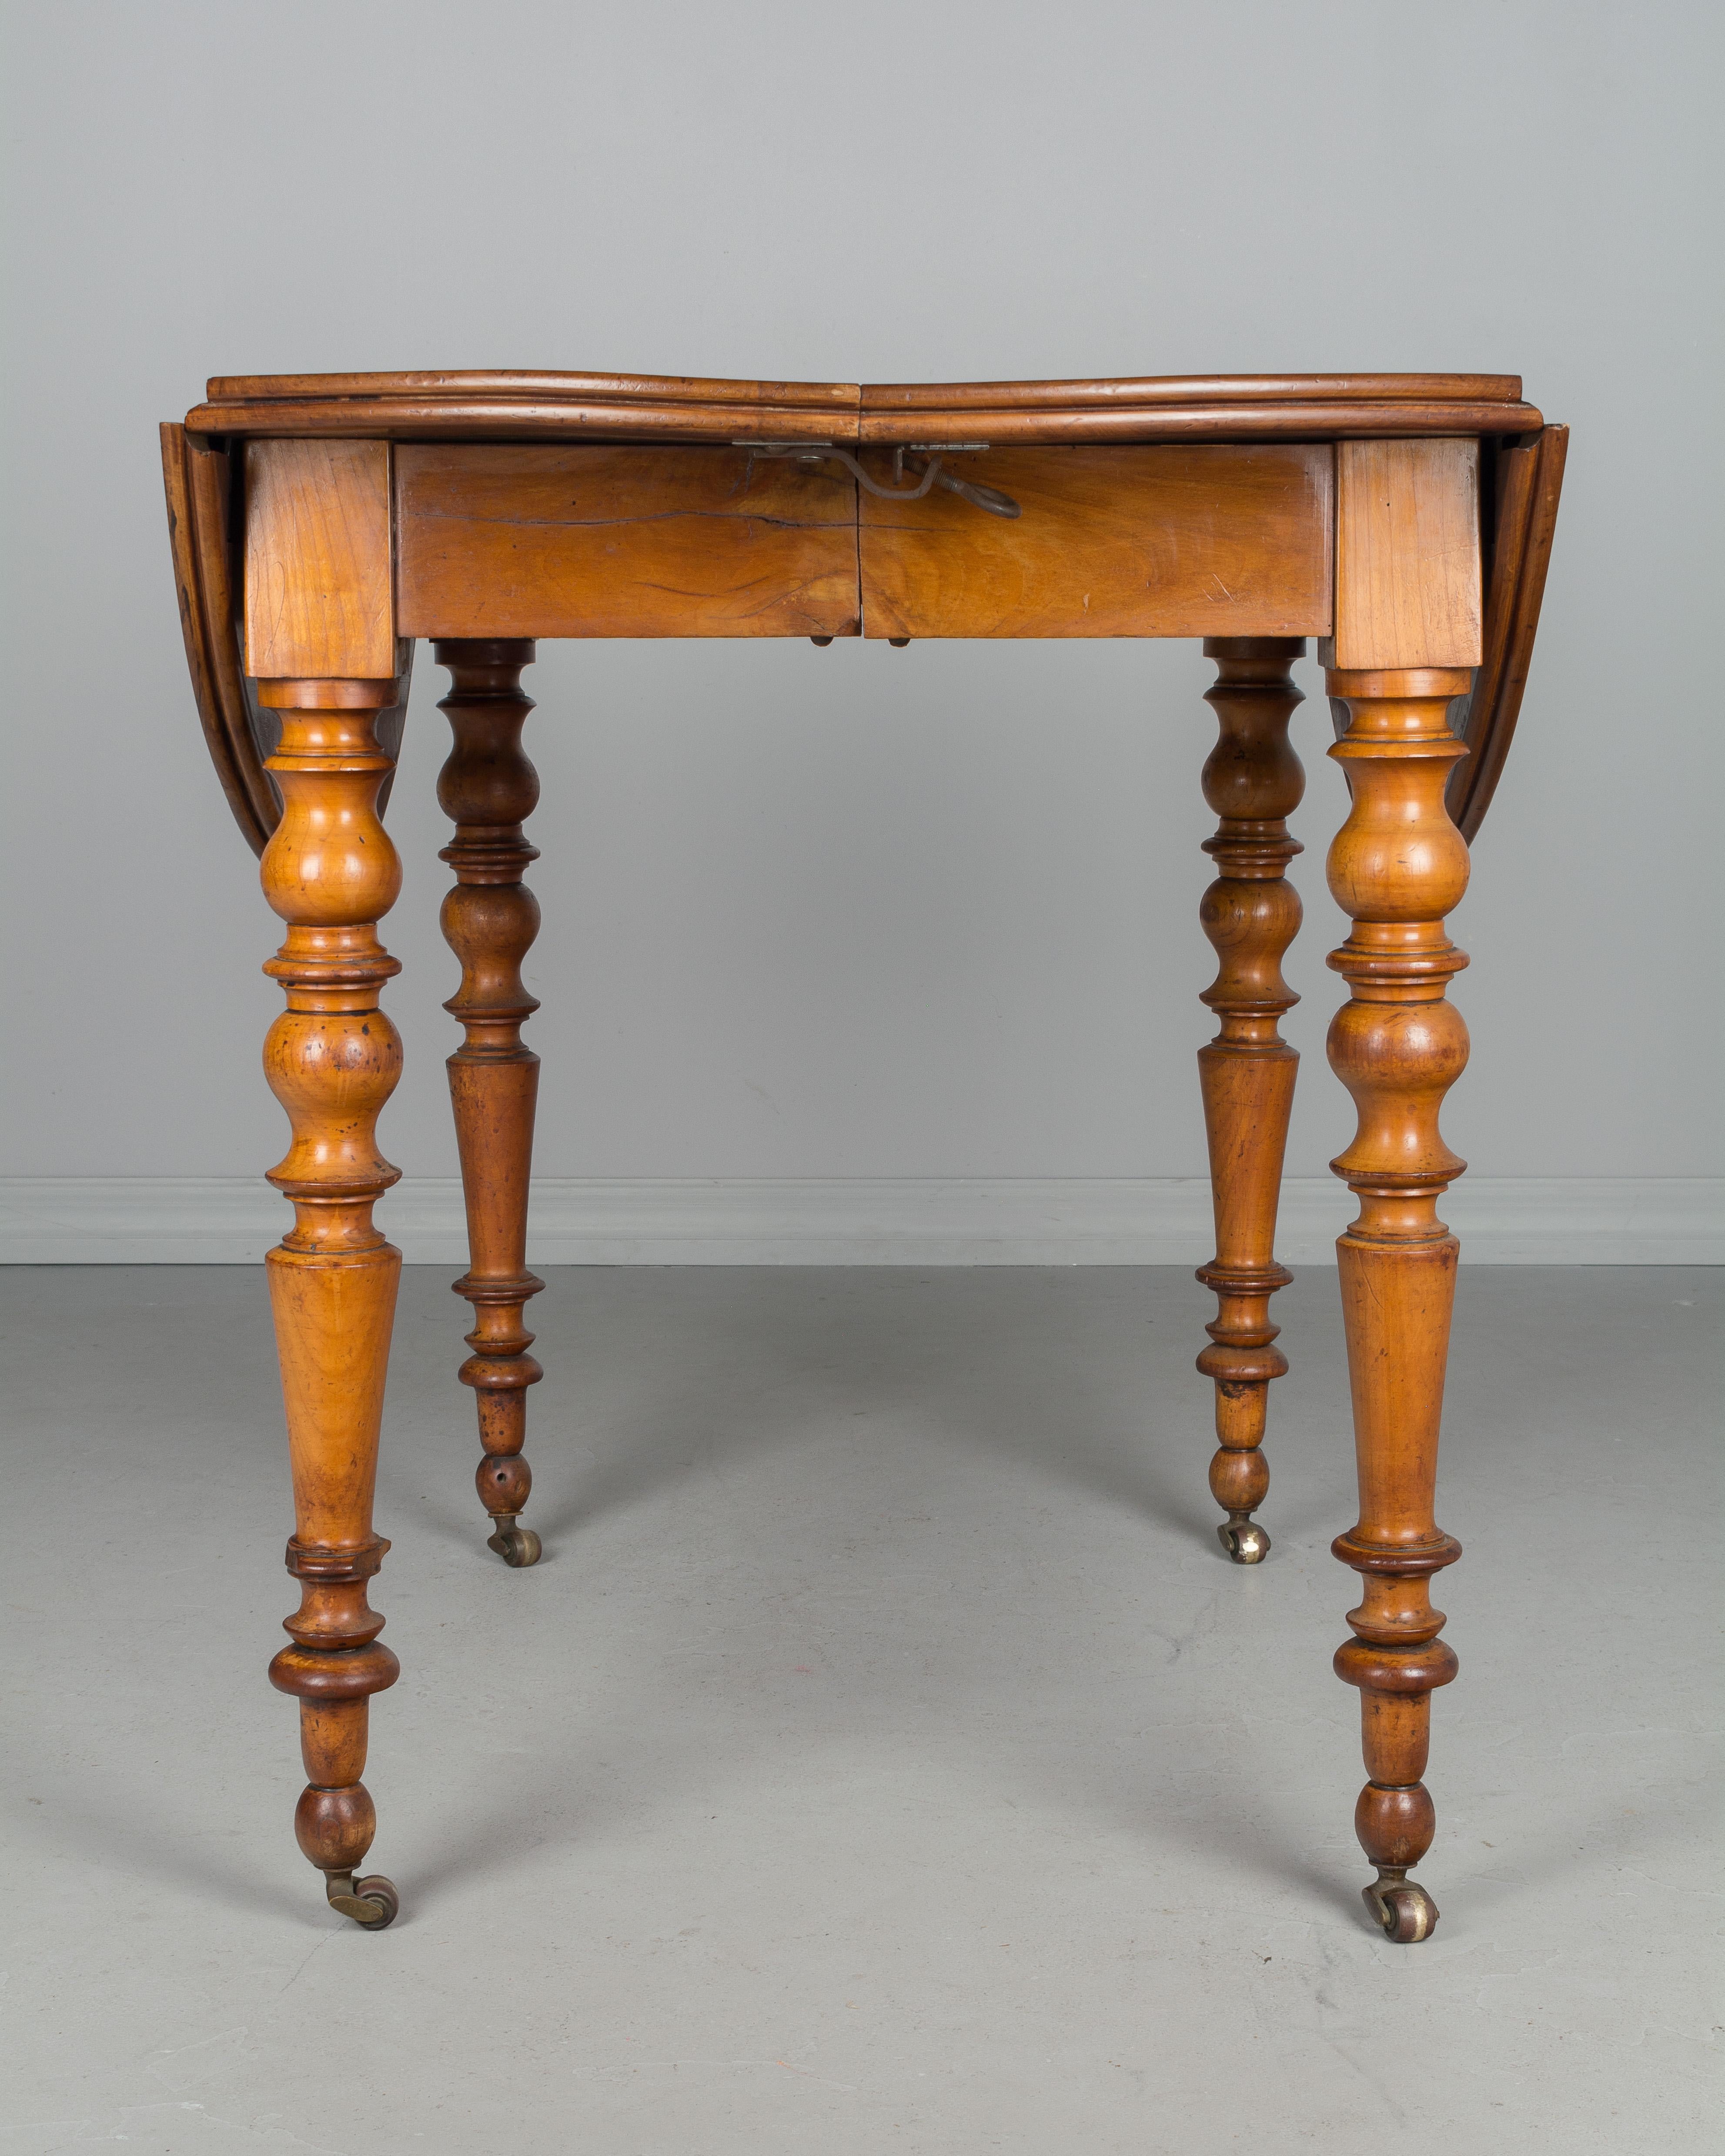 Cast French Drop-Leaf Dining Table